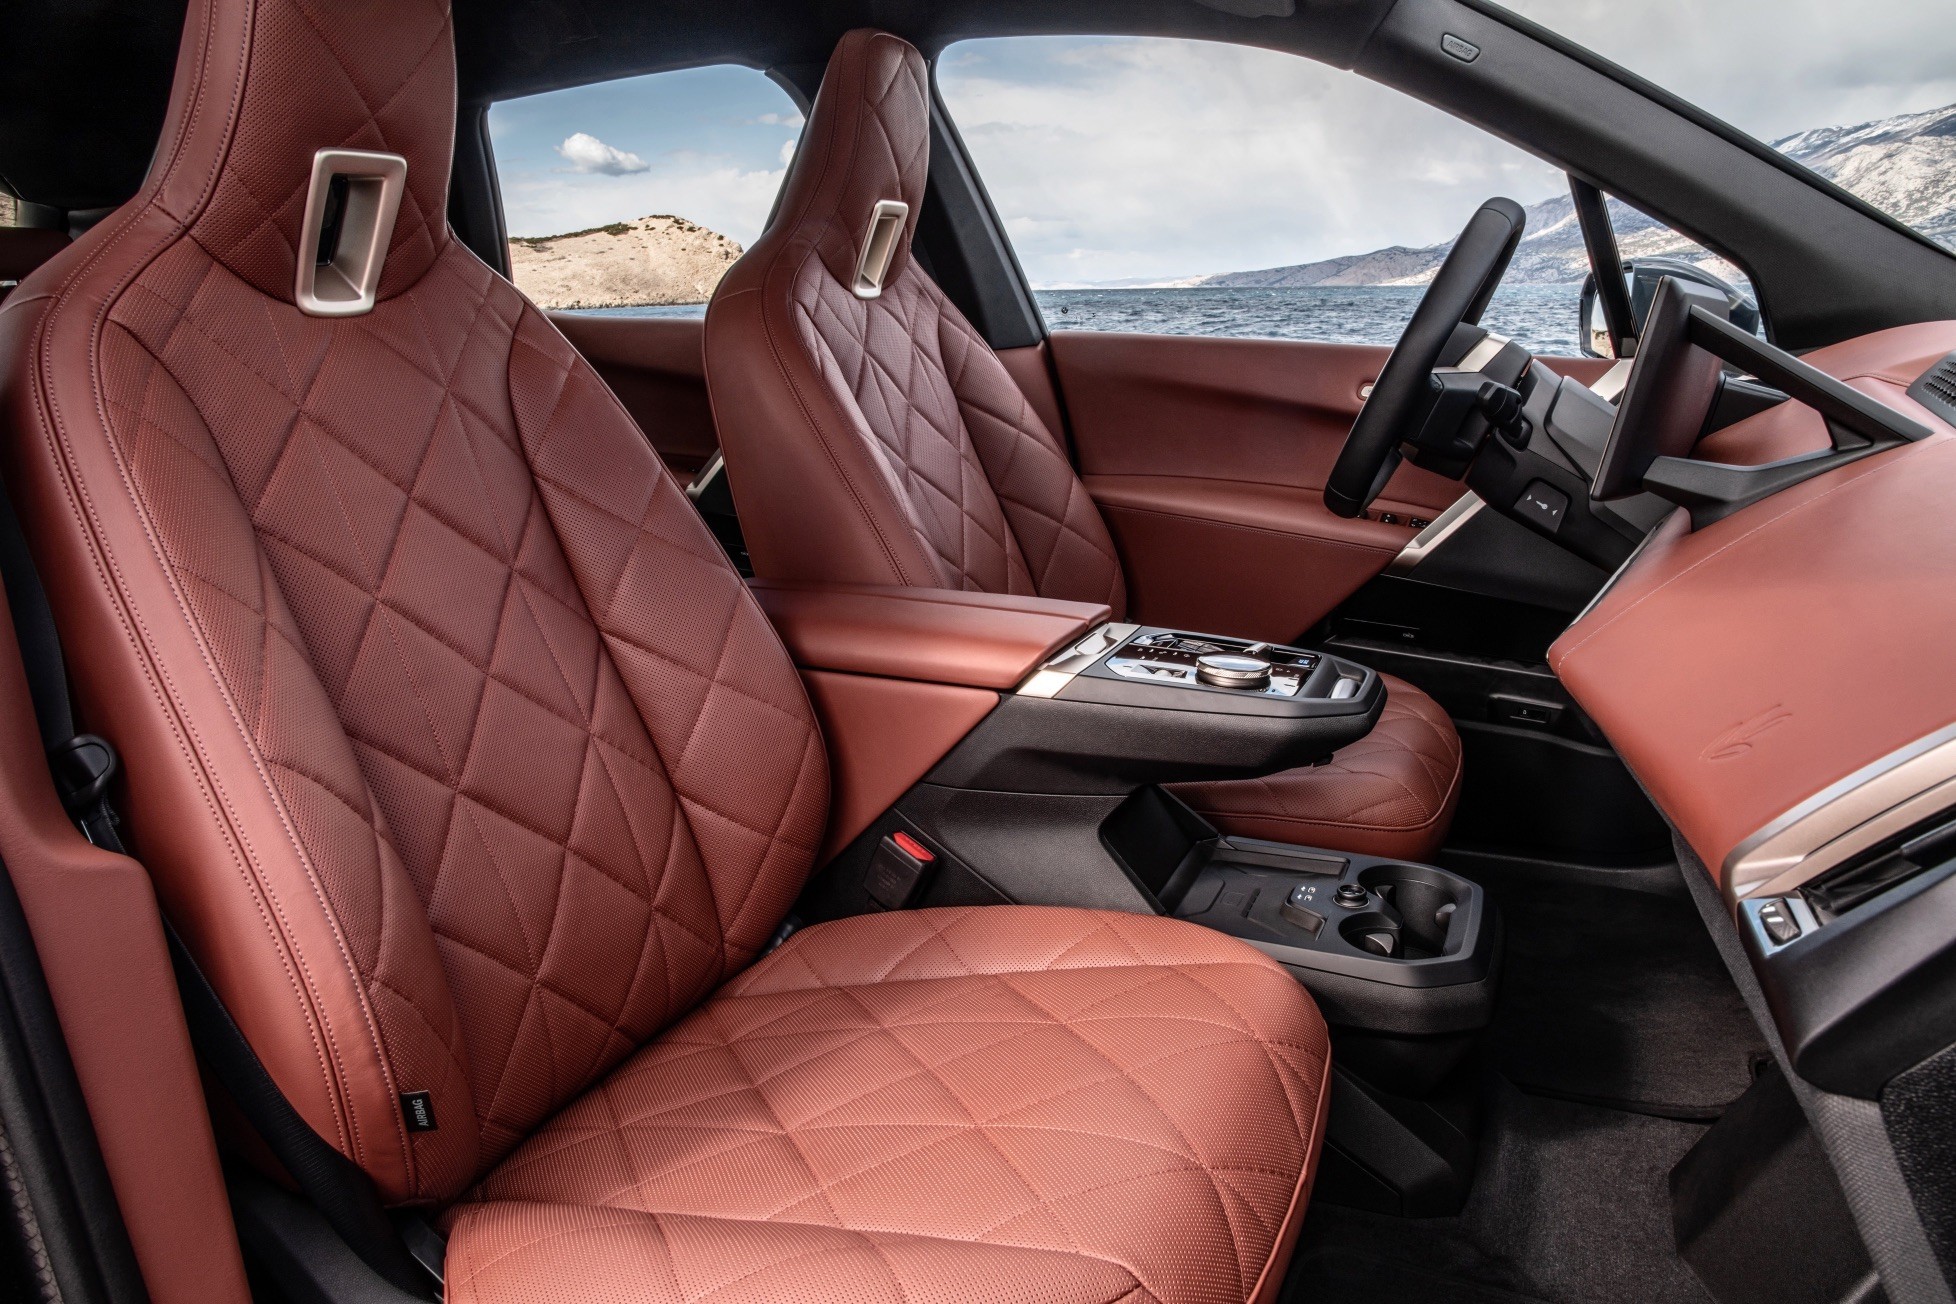 No, BMW is not making heated seats a subscription for US cars